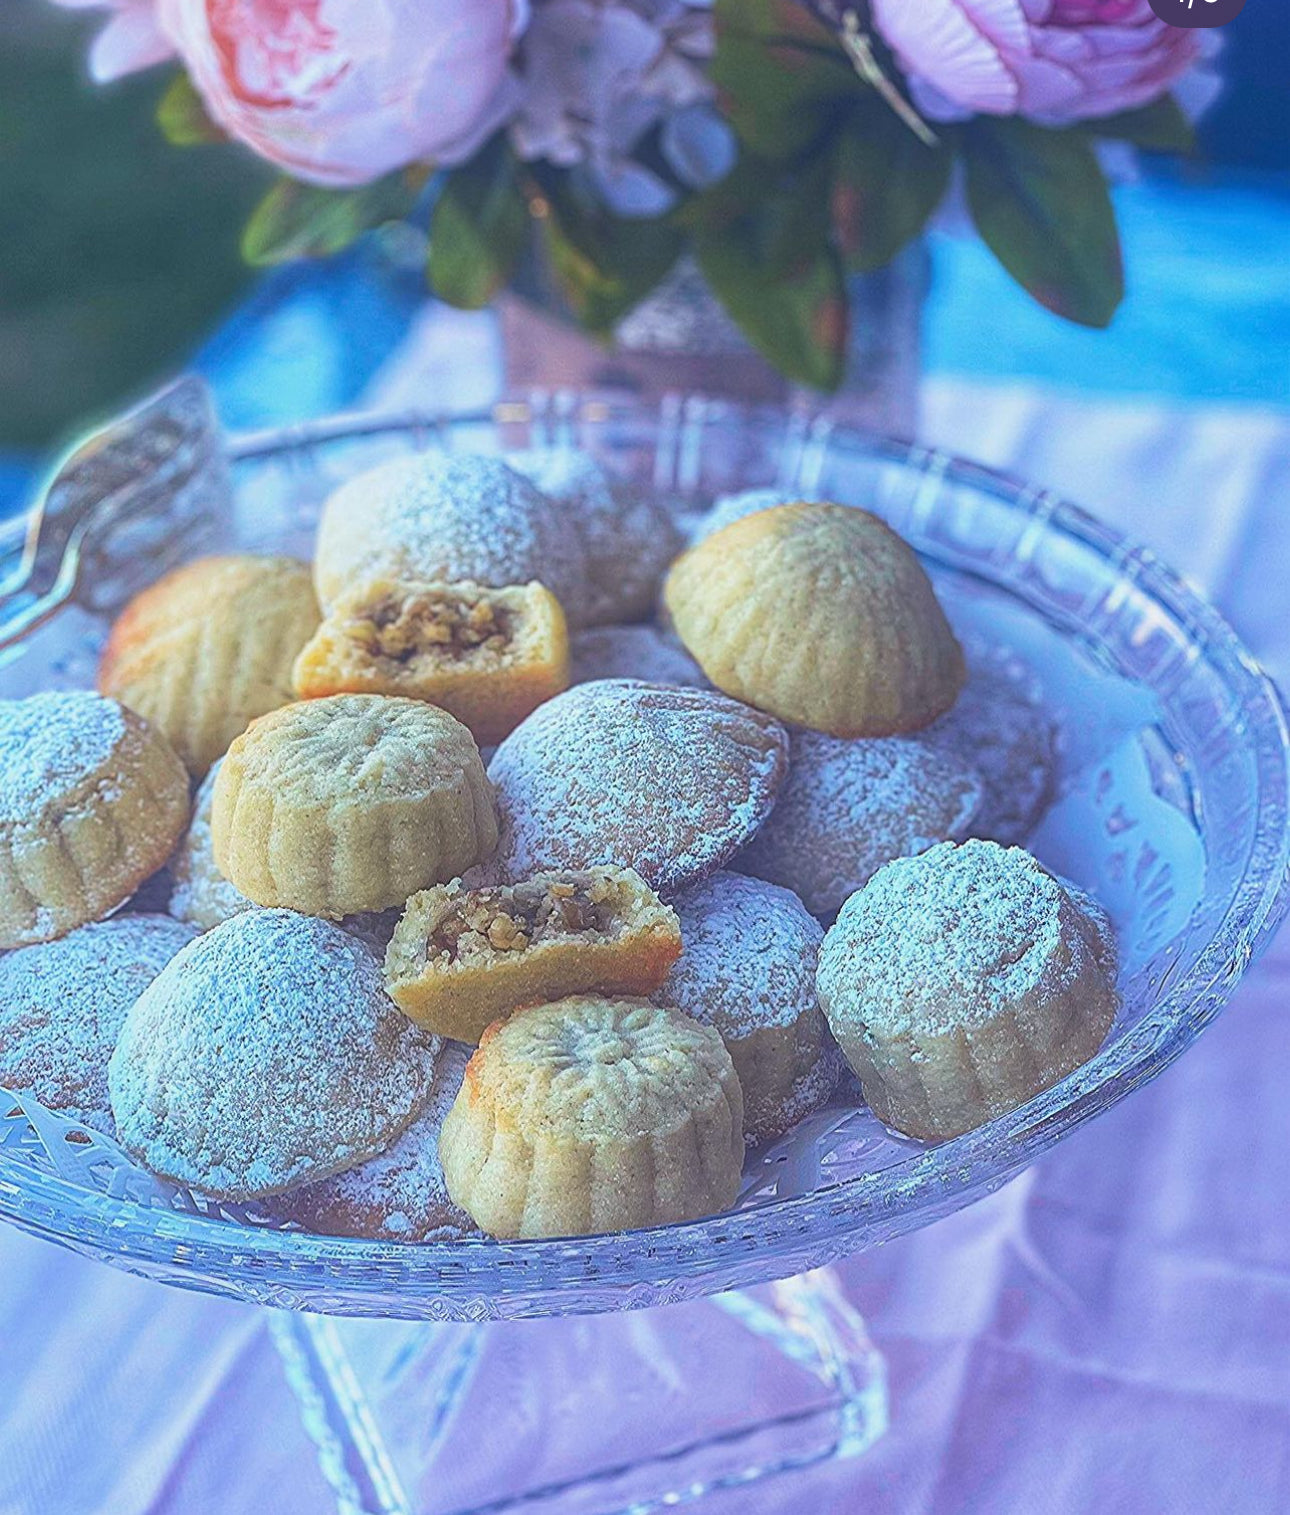 Maamoul – Nut Stuffed Biscuits